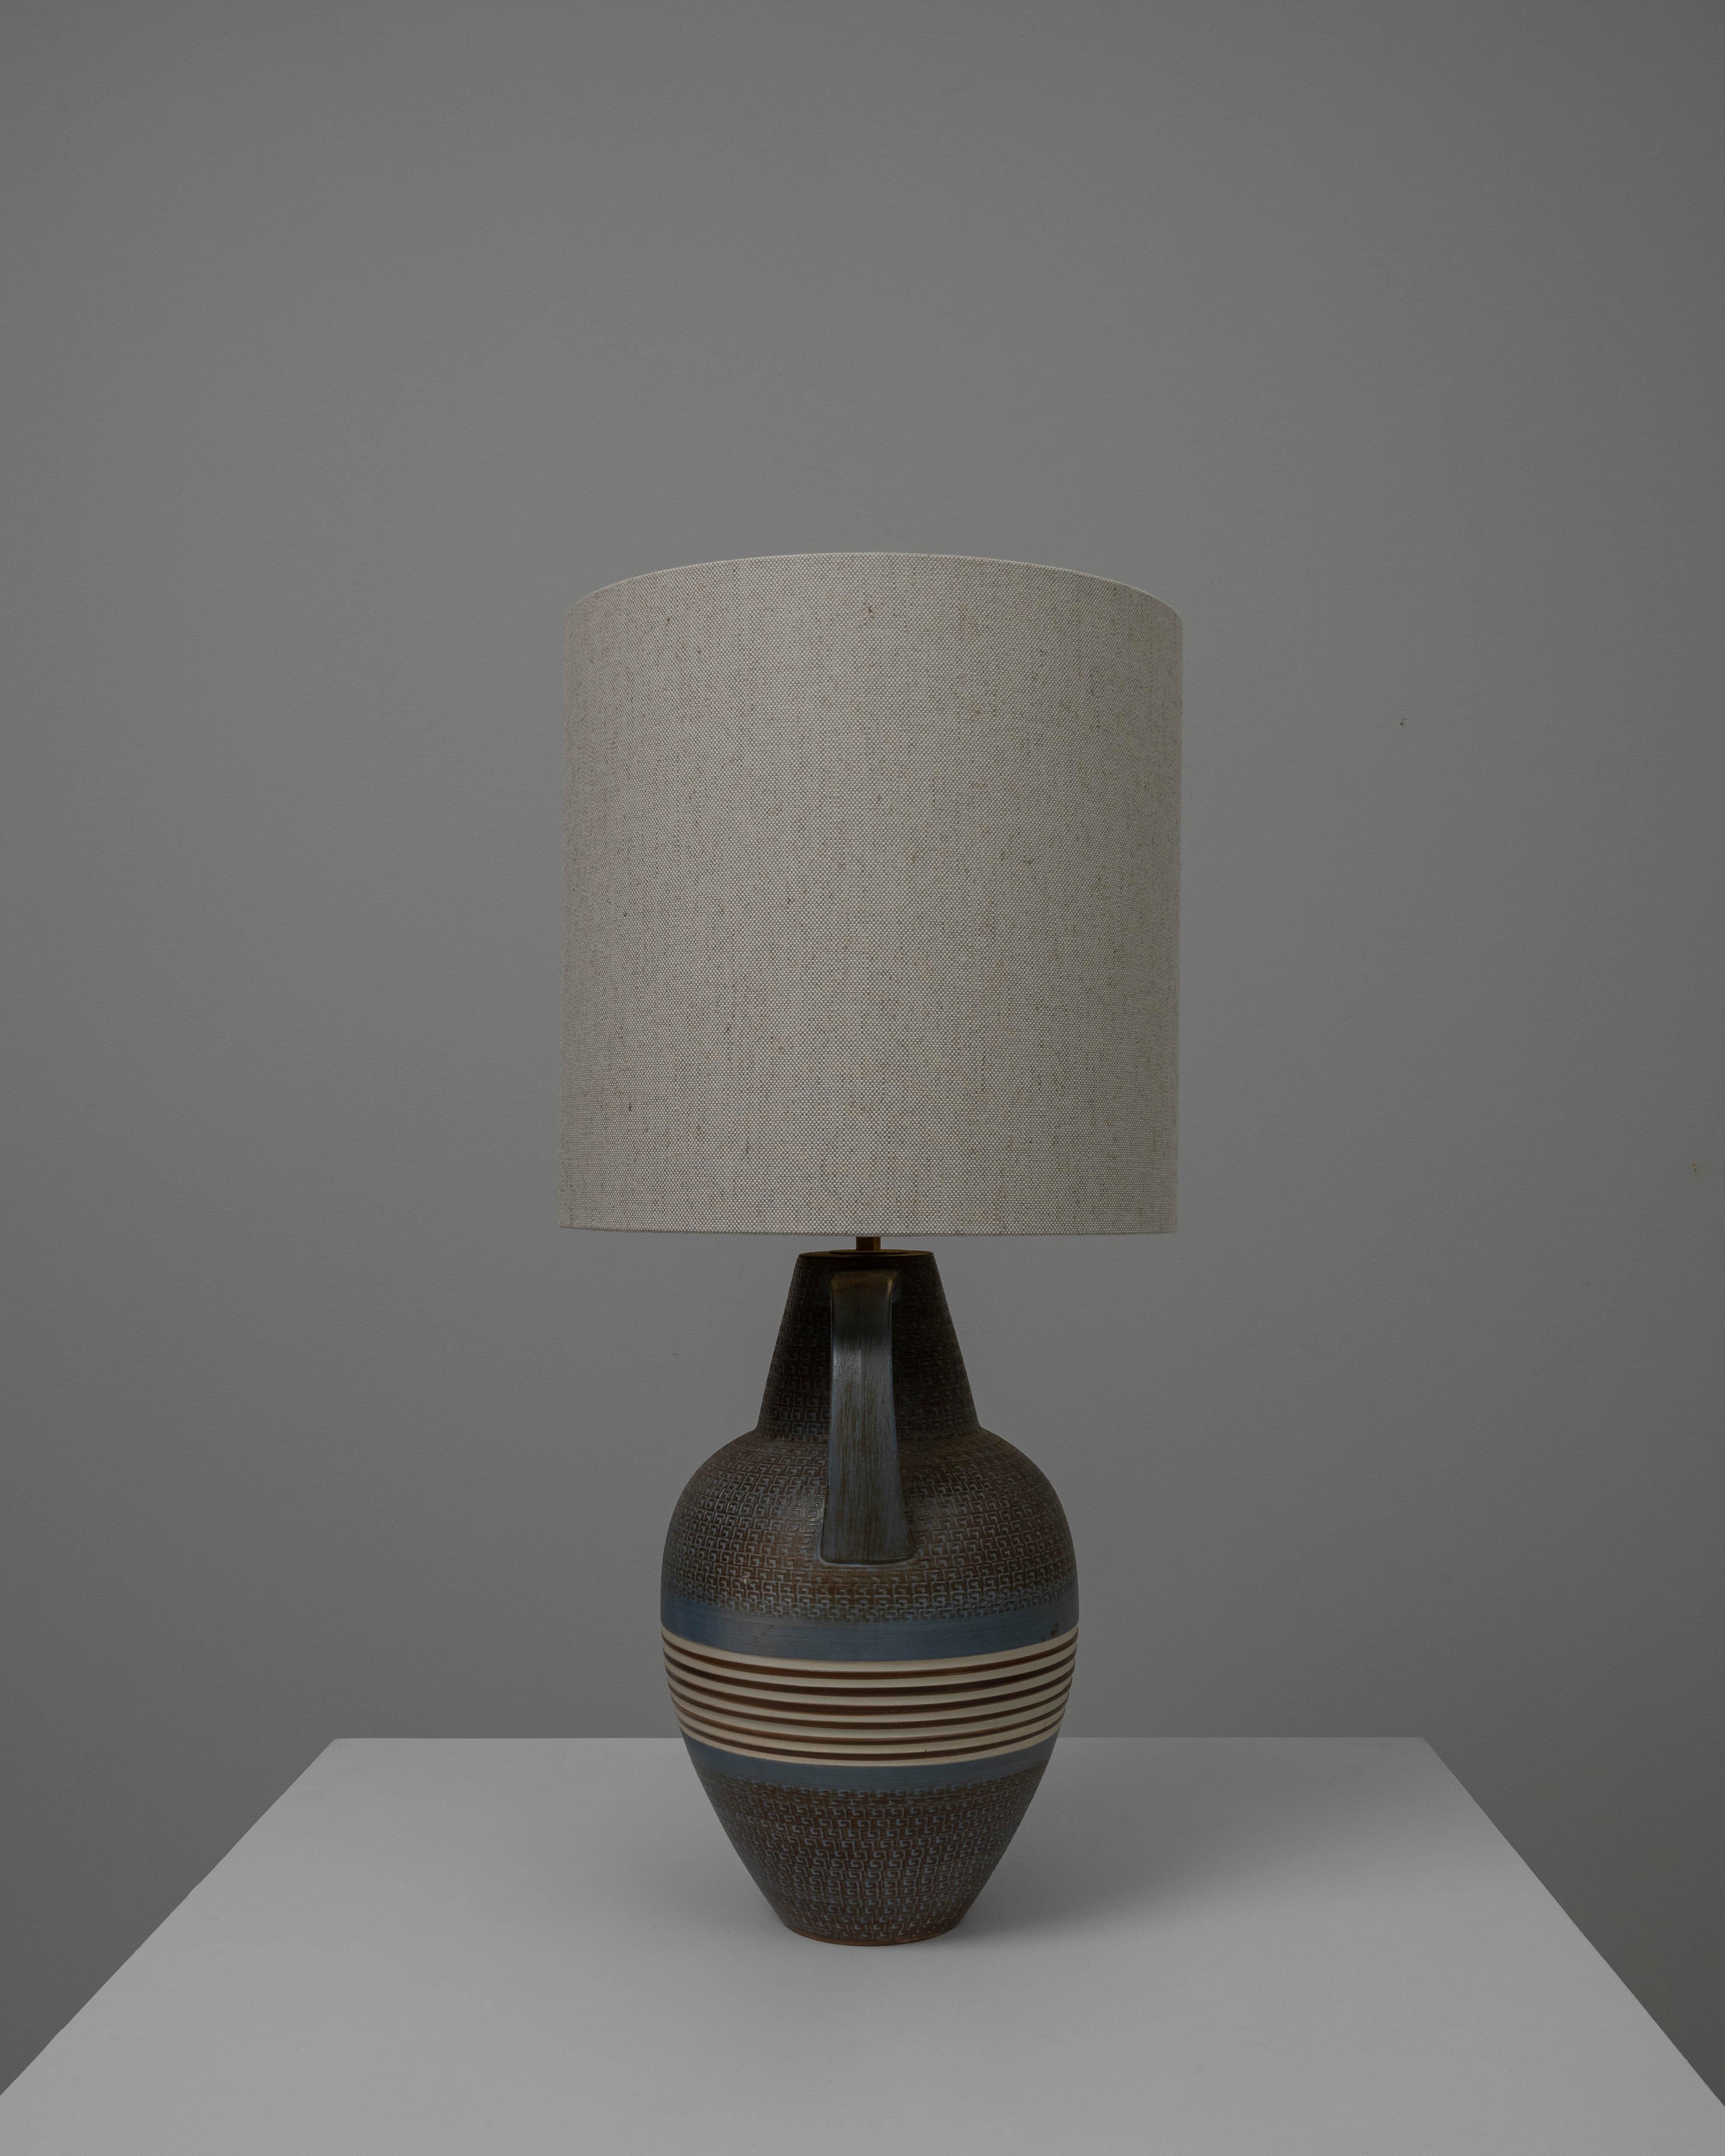 This 20th Century German Ceramic Table Lamp encapsulates the earthy, textural appeal of the era's artisanal design. The base, with its robust form and a handle for a touch of old-world charm, features a deep, variegated glaze of browns and greys,